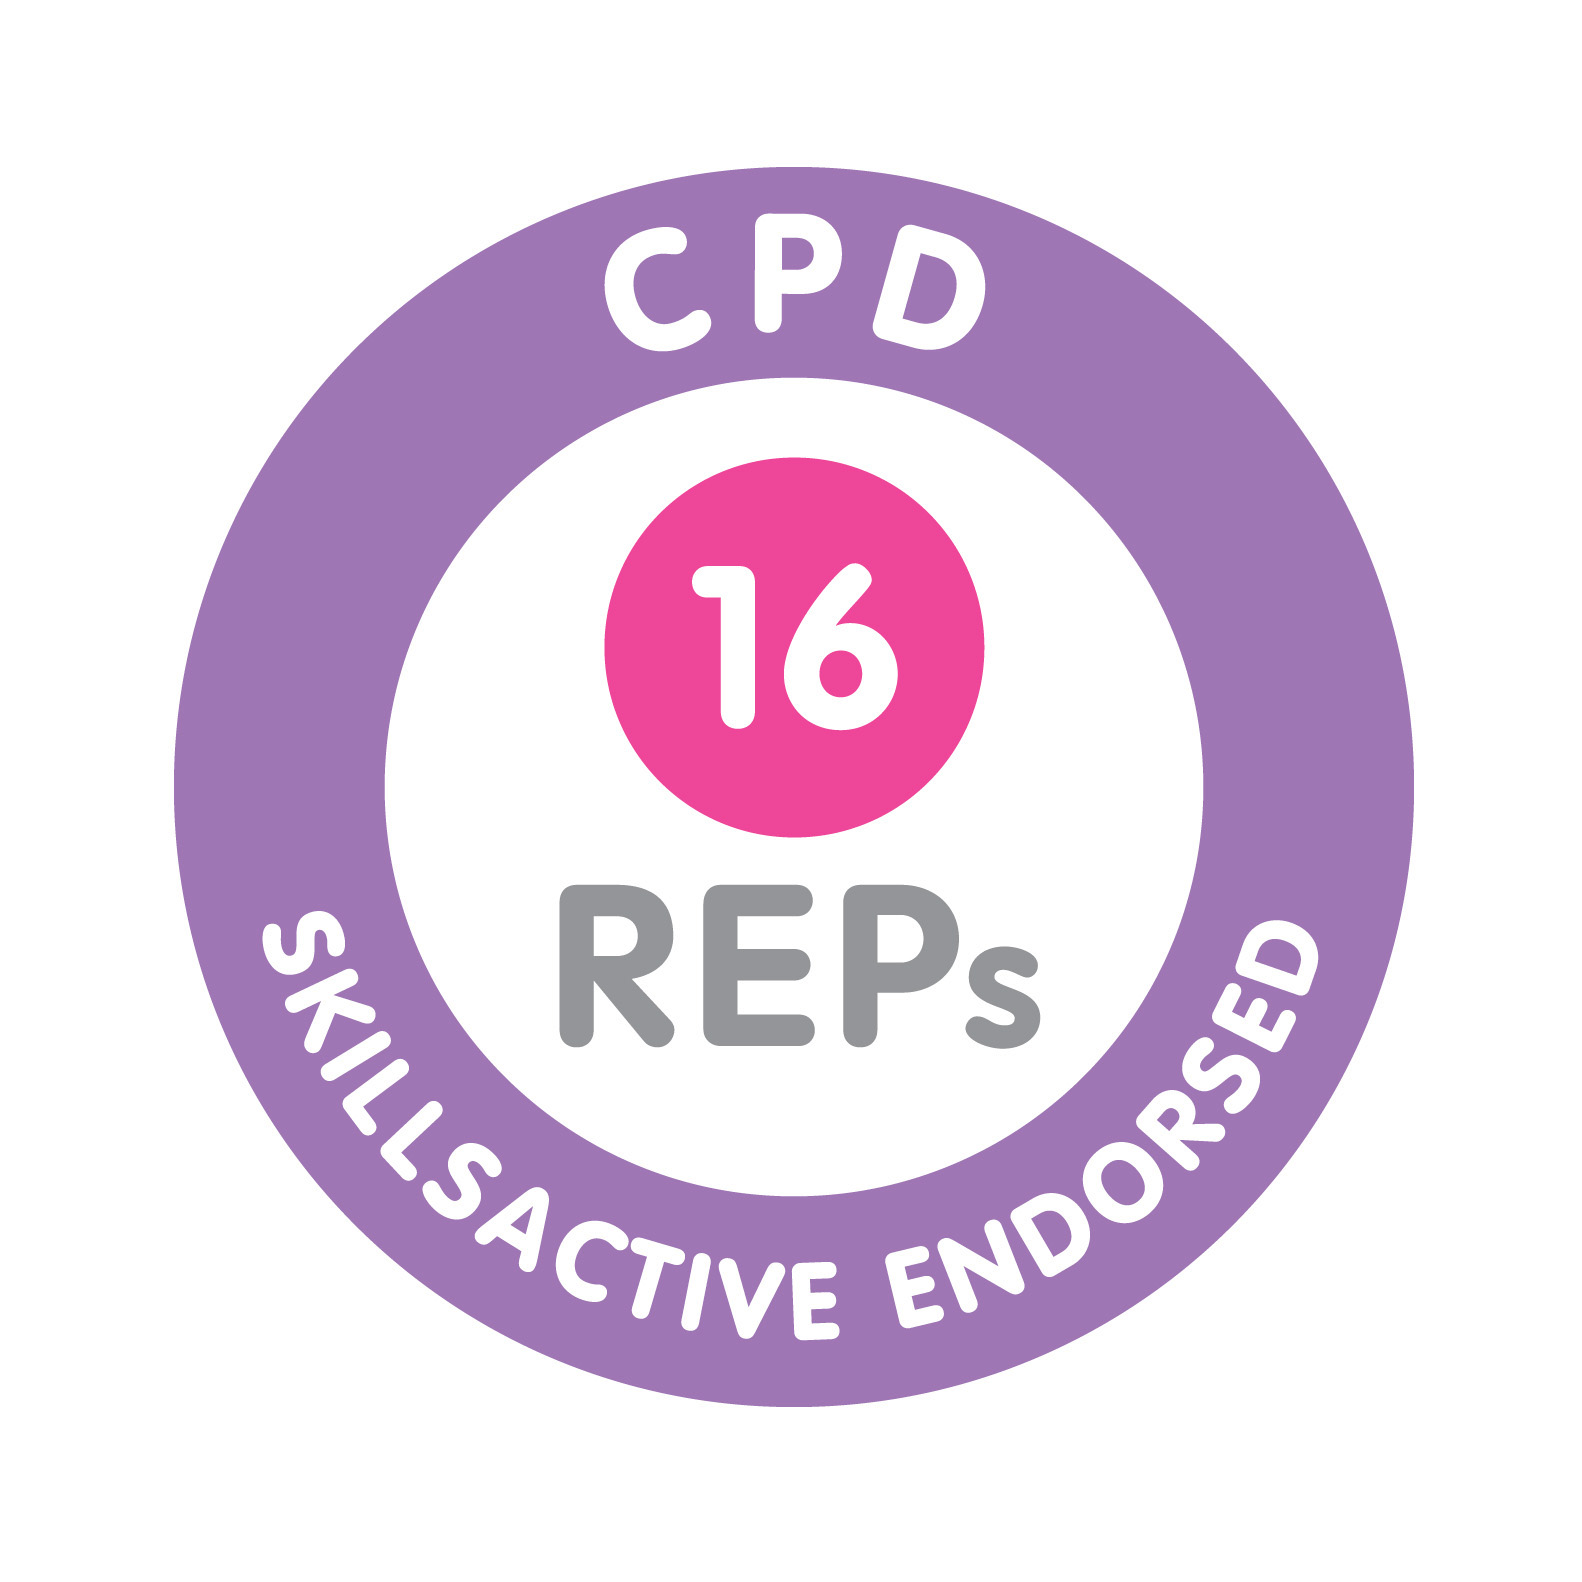 Reps CPD 16